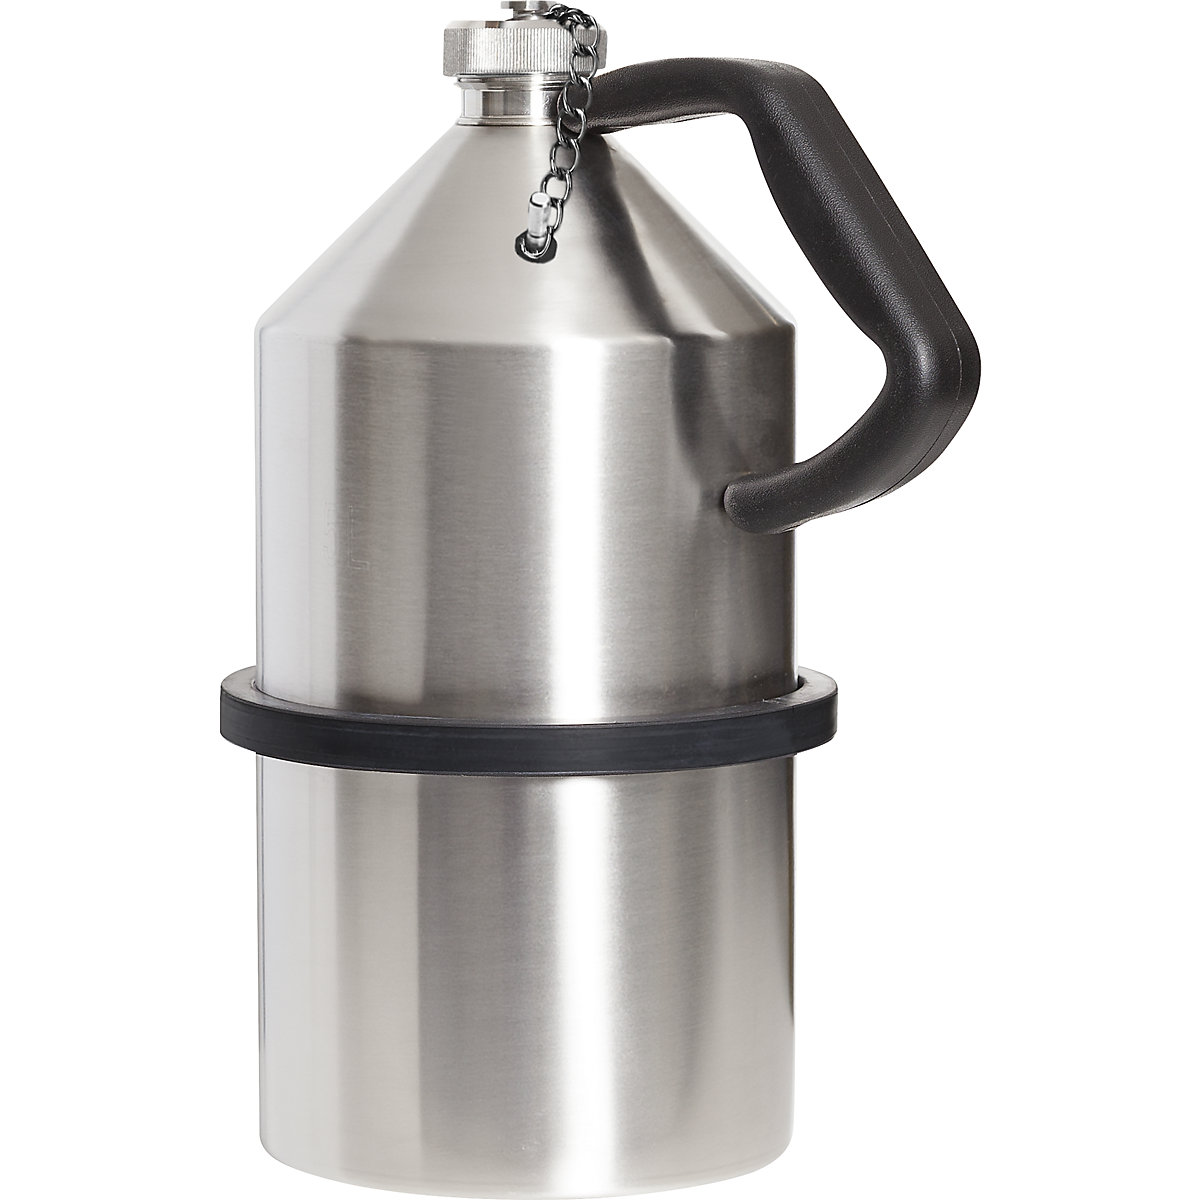 Stainless steel safety container - FALCON